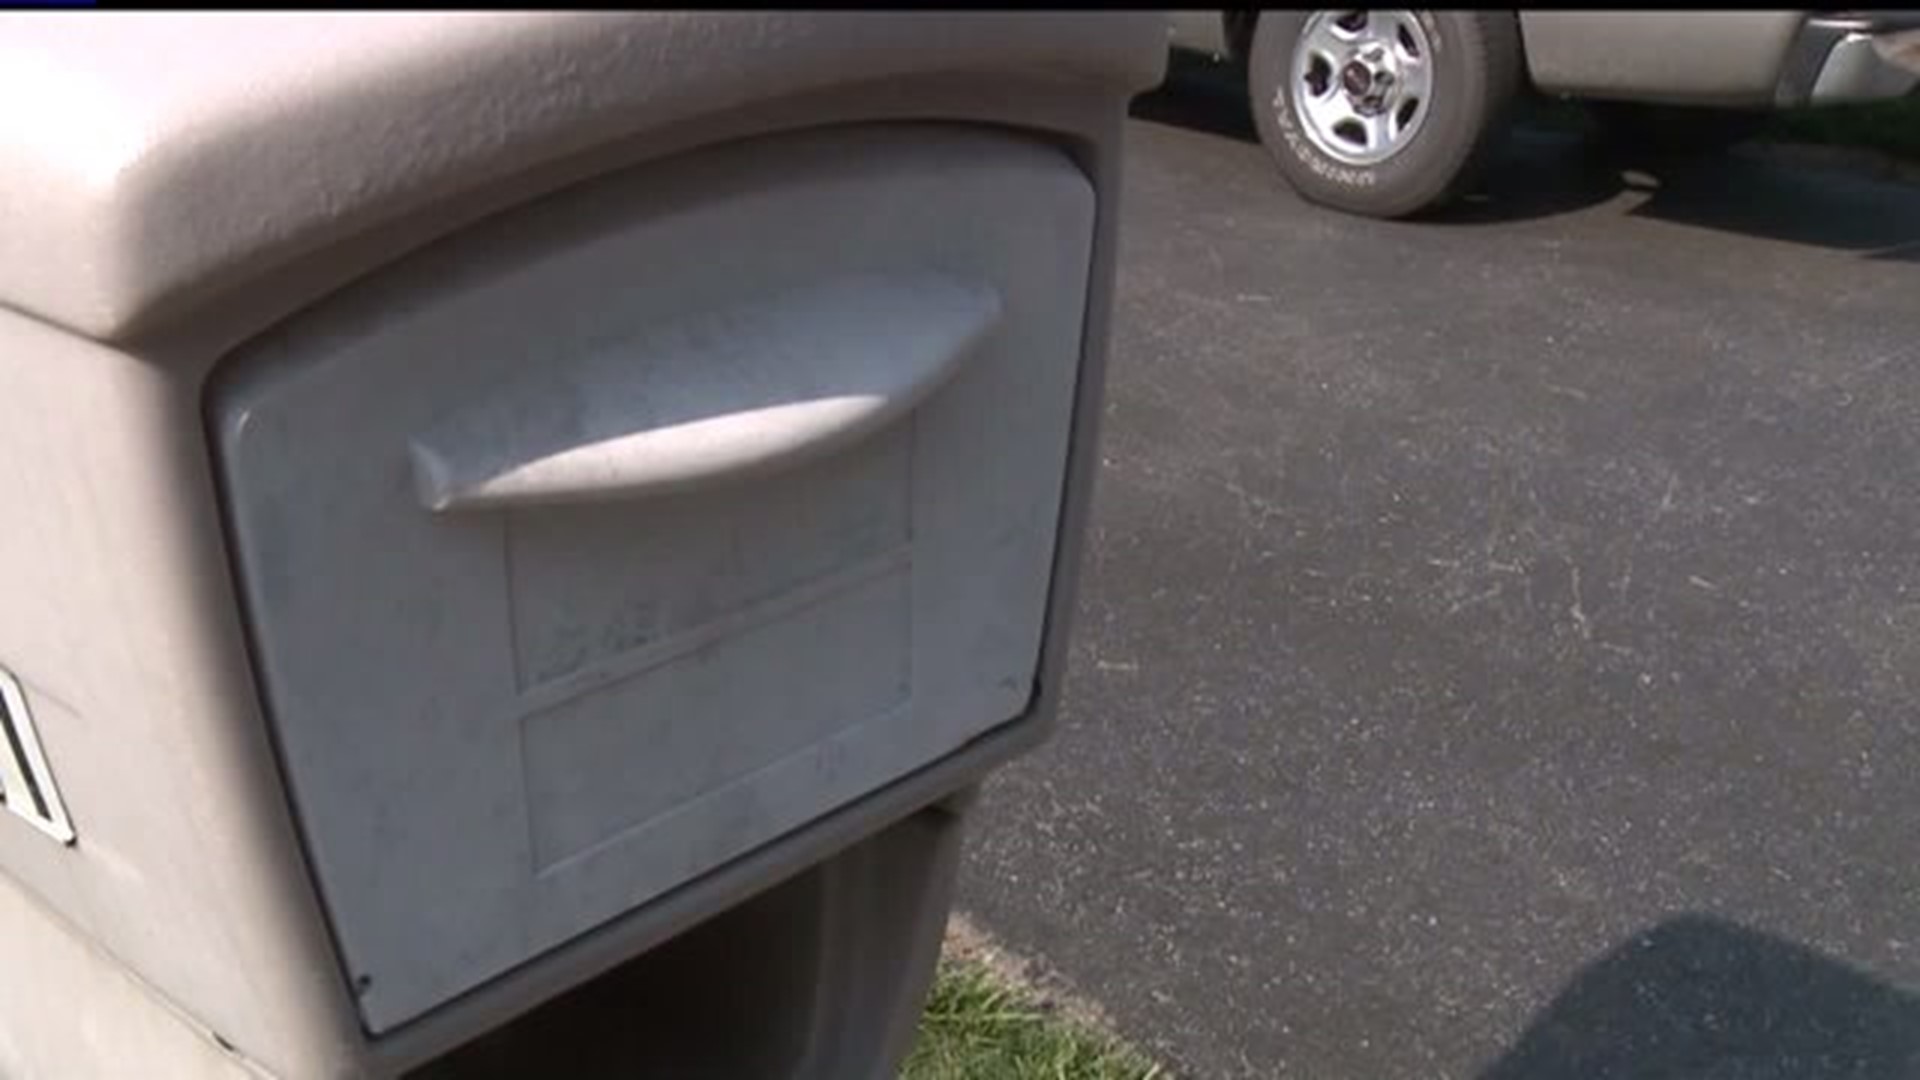 Checks Stolen From Mailboxes in Columbia